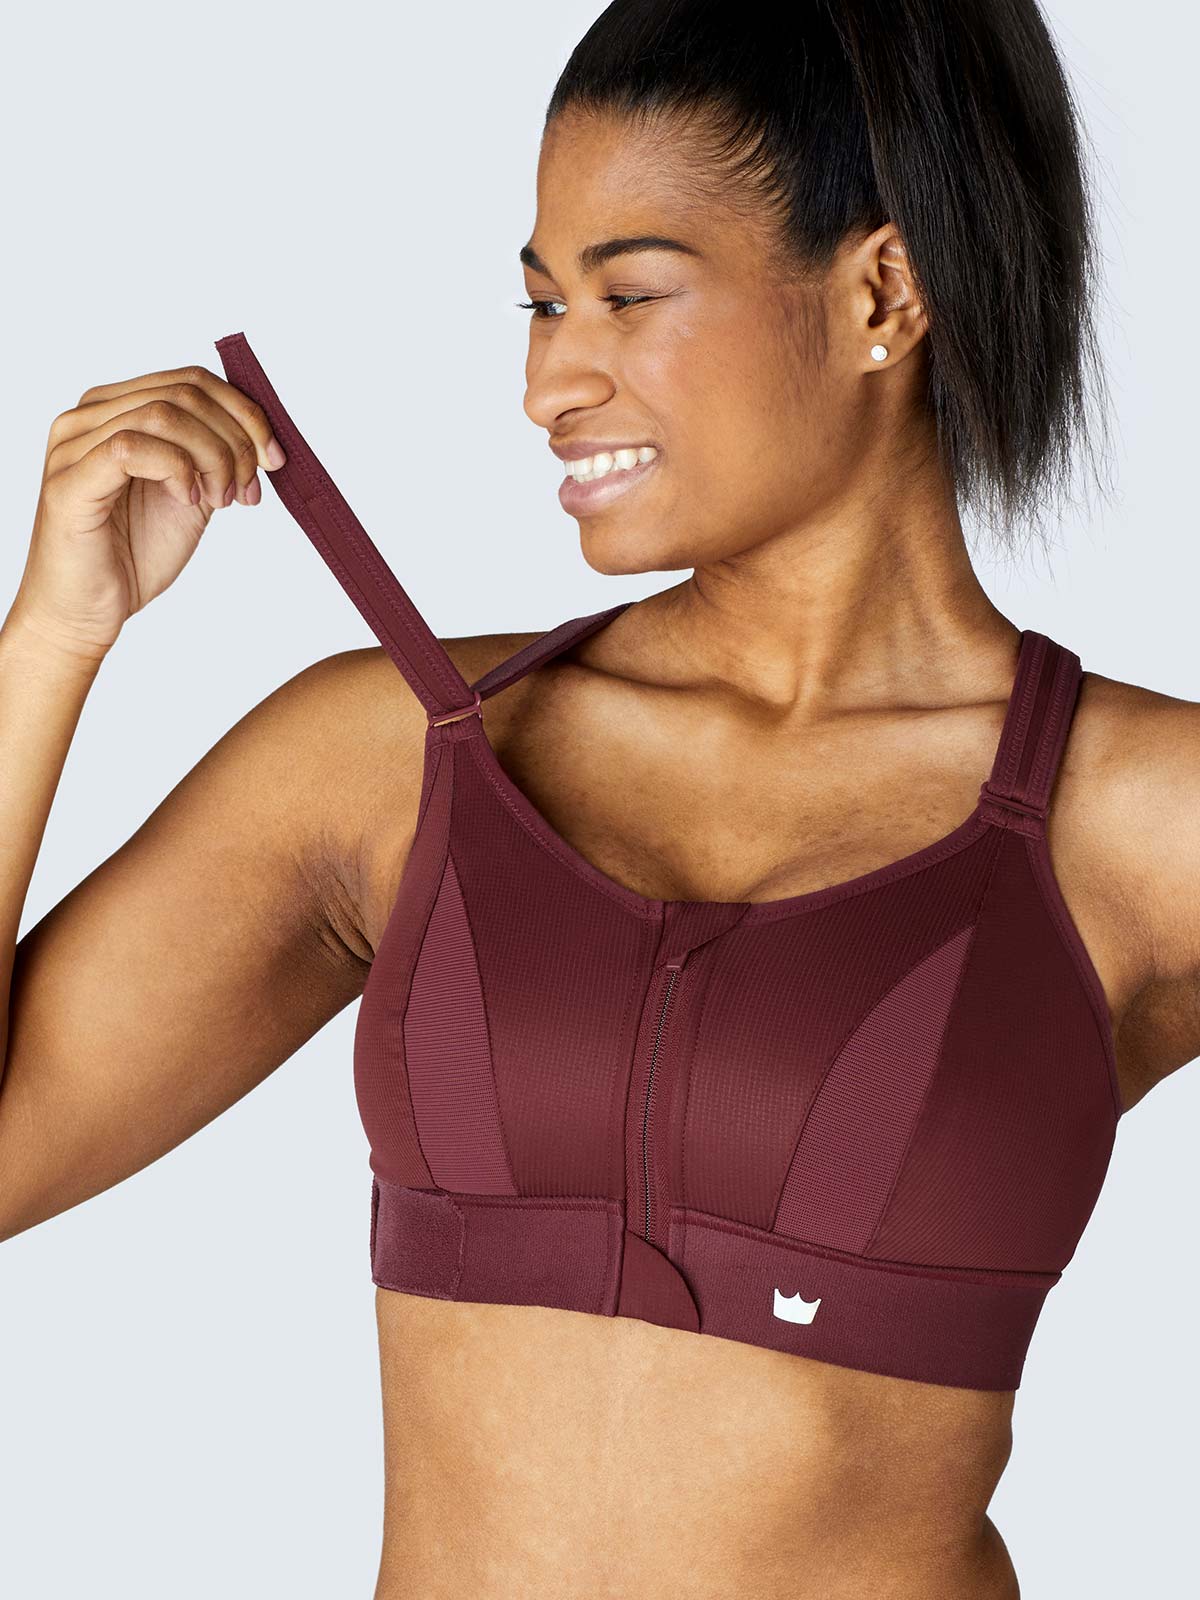 SHEFIT - New year, new favorite bra! Relentless is the limited edition  color to help you tackle your 2019 goals!